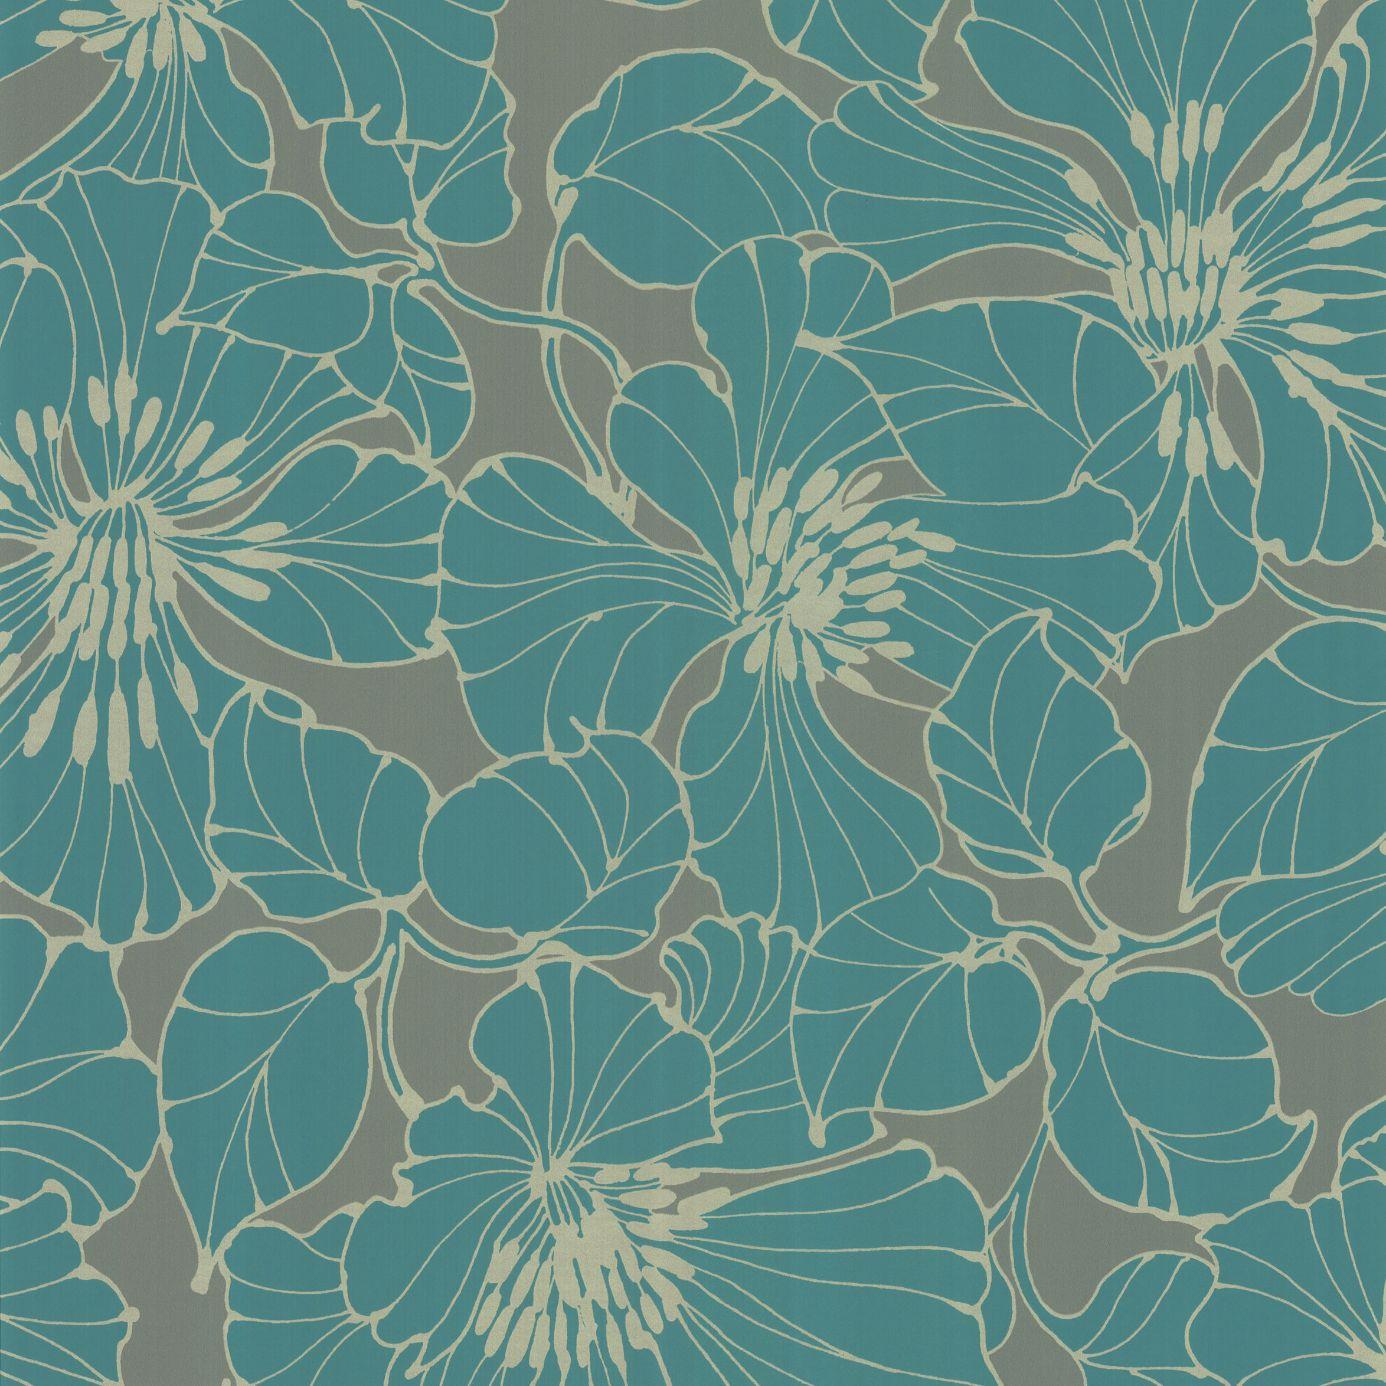  Identity Wallpapers Passion Wallpaper   TurquoiseGreySilver   30734 1386x1386